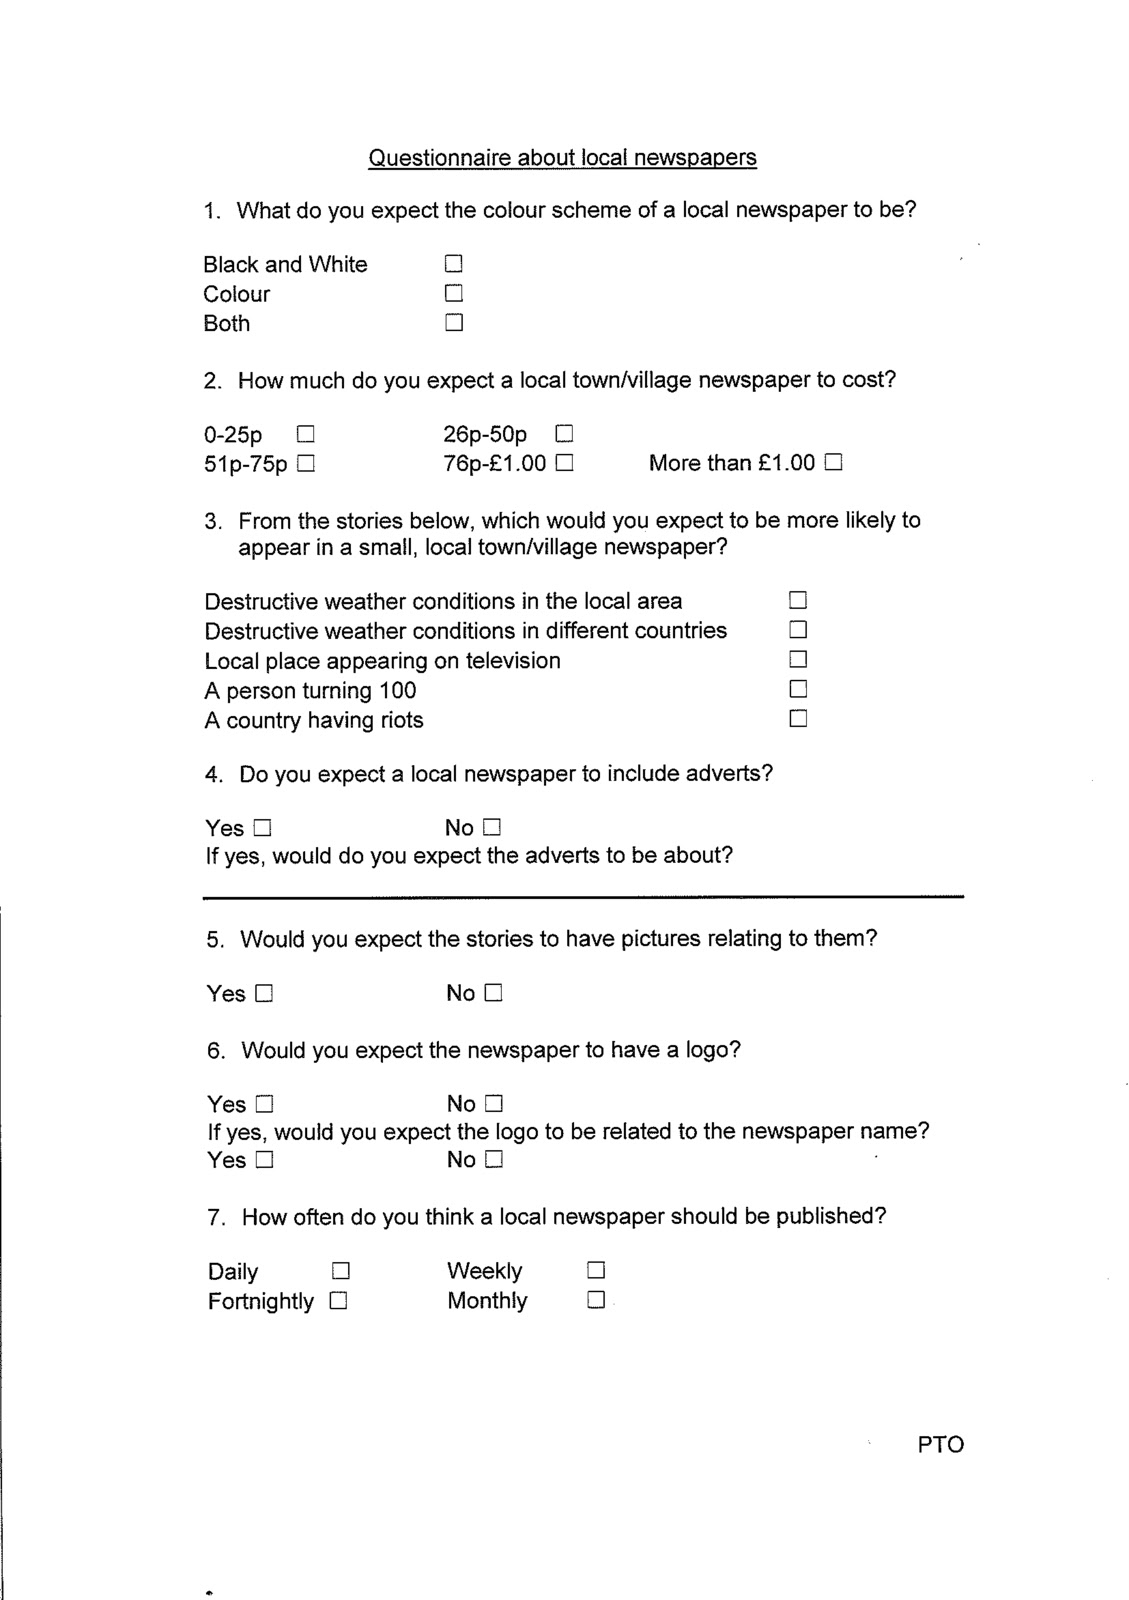 Holly Pettifor A2 Media Coursework: Questionnaire - Page 1